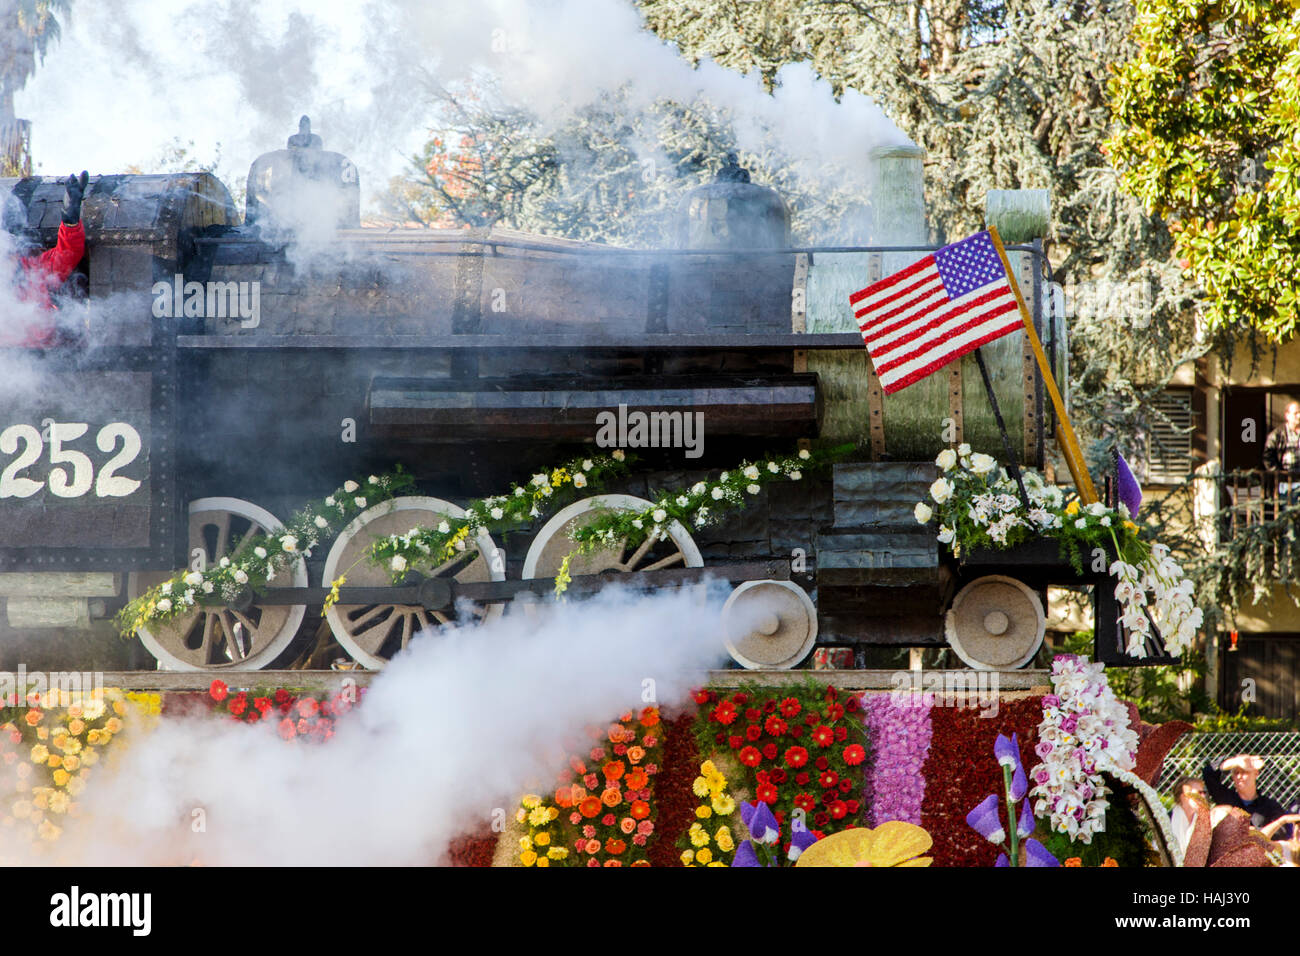 Float decorated like steam locomotive with flowers in the annual New Years Day Rose Bowl Parade, Pasadena, California, USA Stock Photo